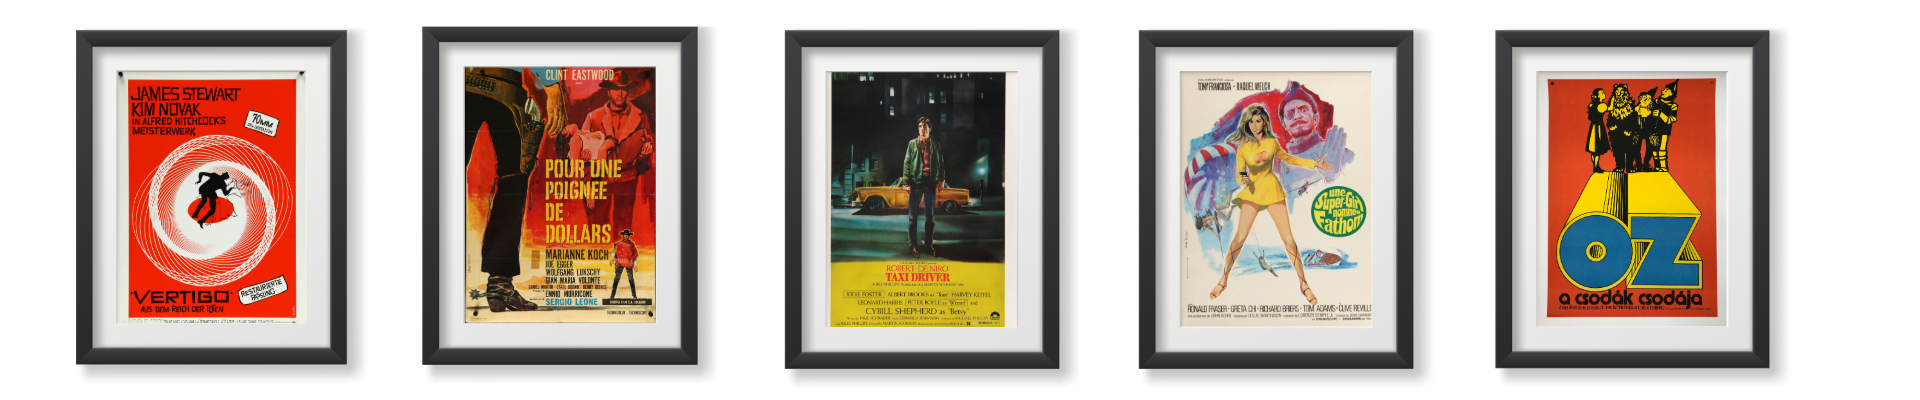 Preserving Cinema History: A Guide to Framing Original Movie Posters